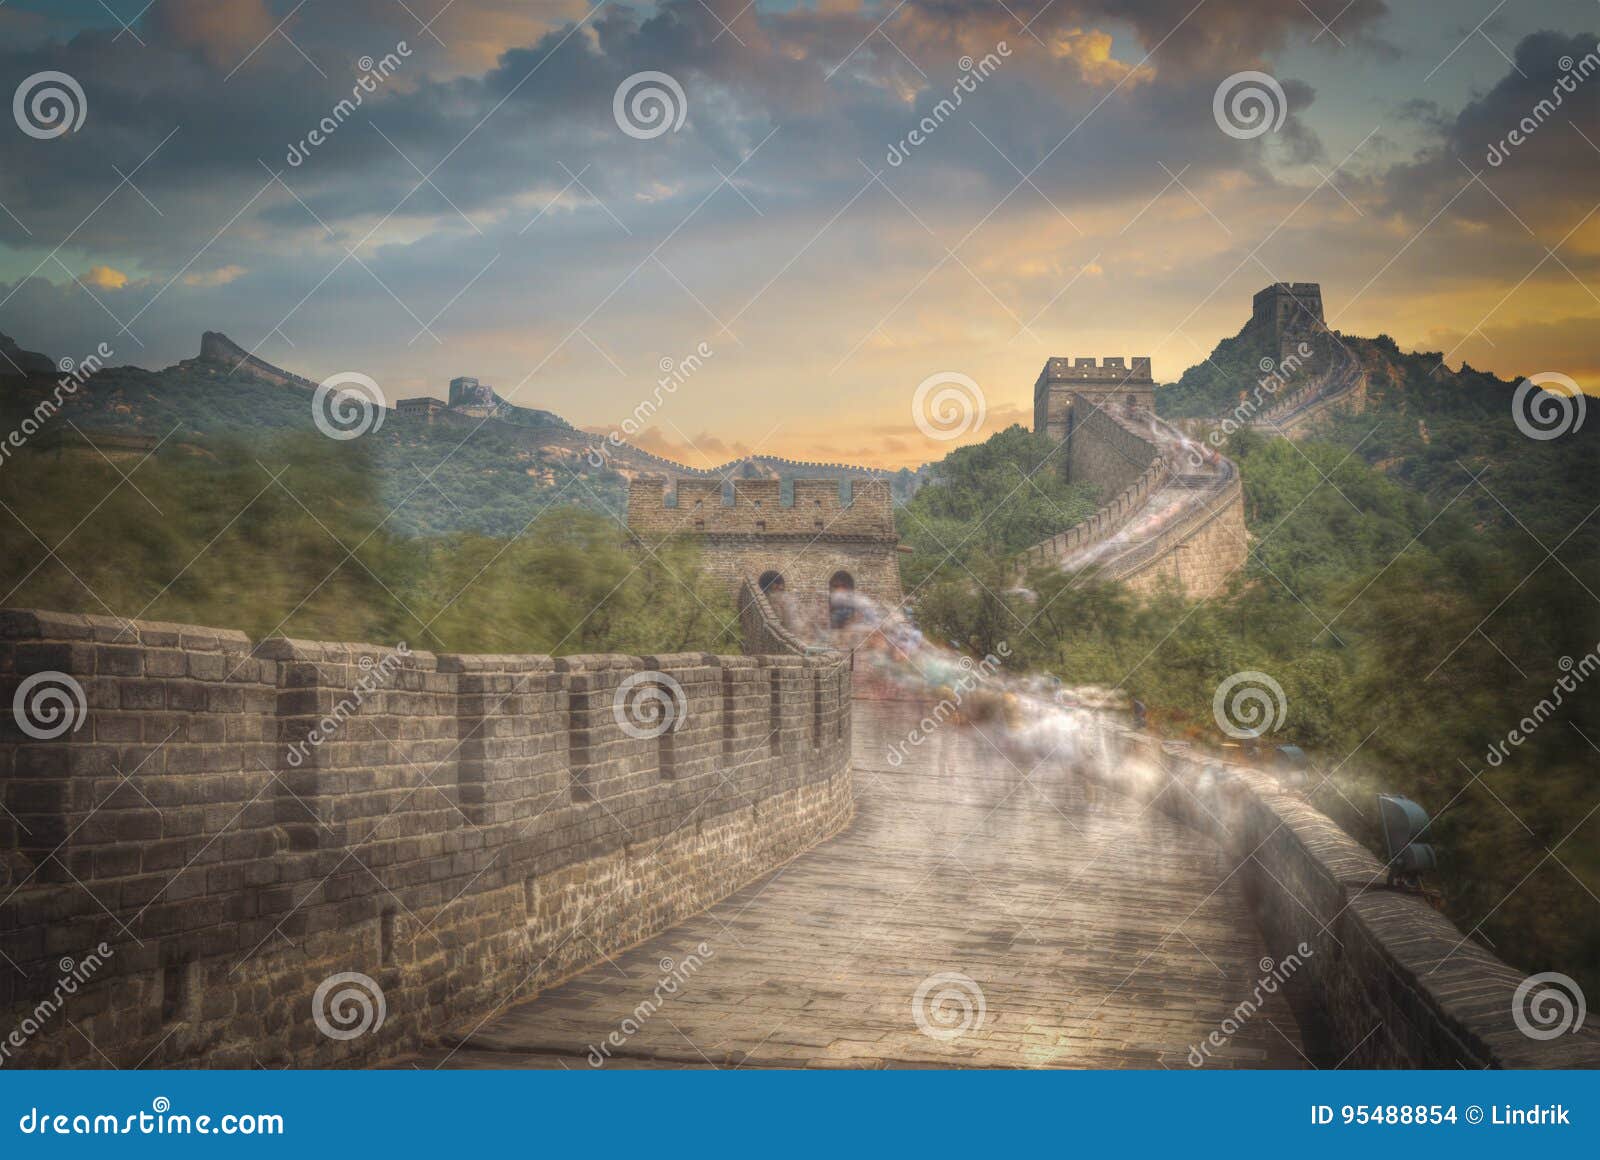 Great Chinese wall stock photo. Image of culture, wall - 95488854